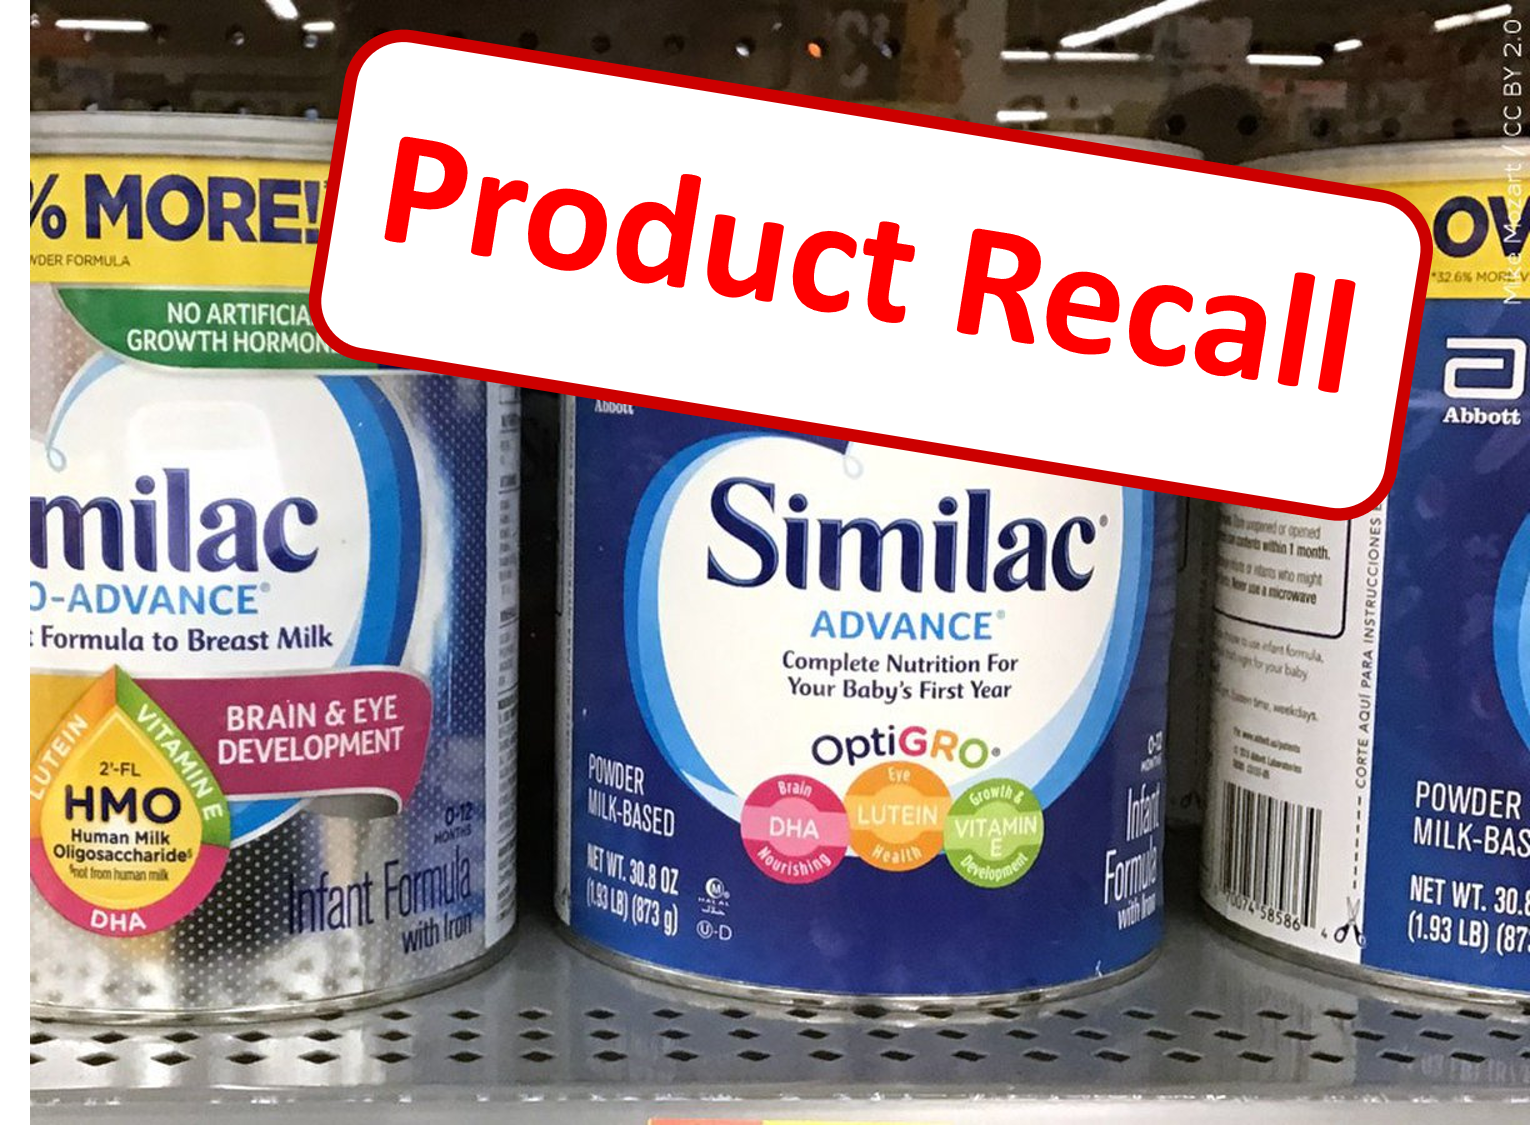 Jollys announces recall of Similac baby formula products following reports of infections in US